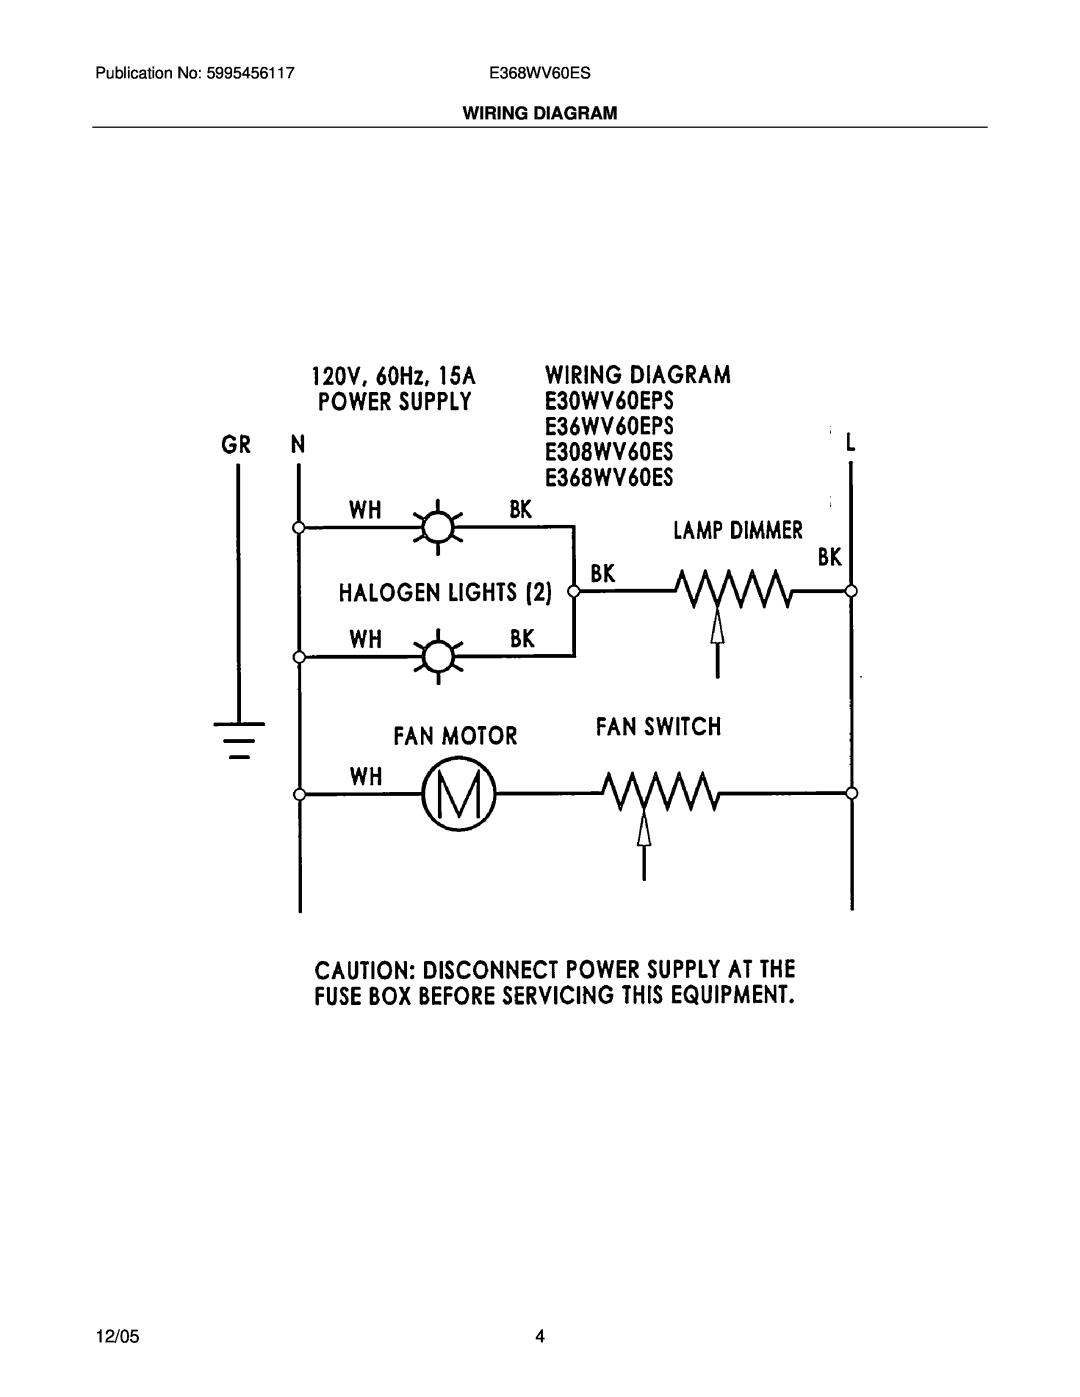 Electrolux installation instructions Wiring Diagram, 12/05, E368WV60ES 